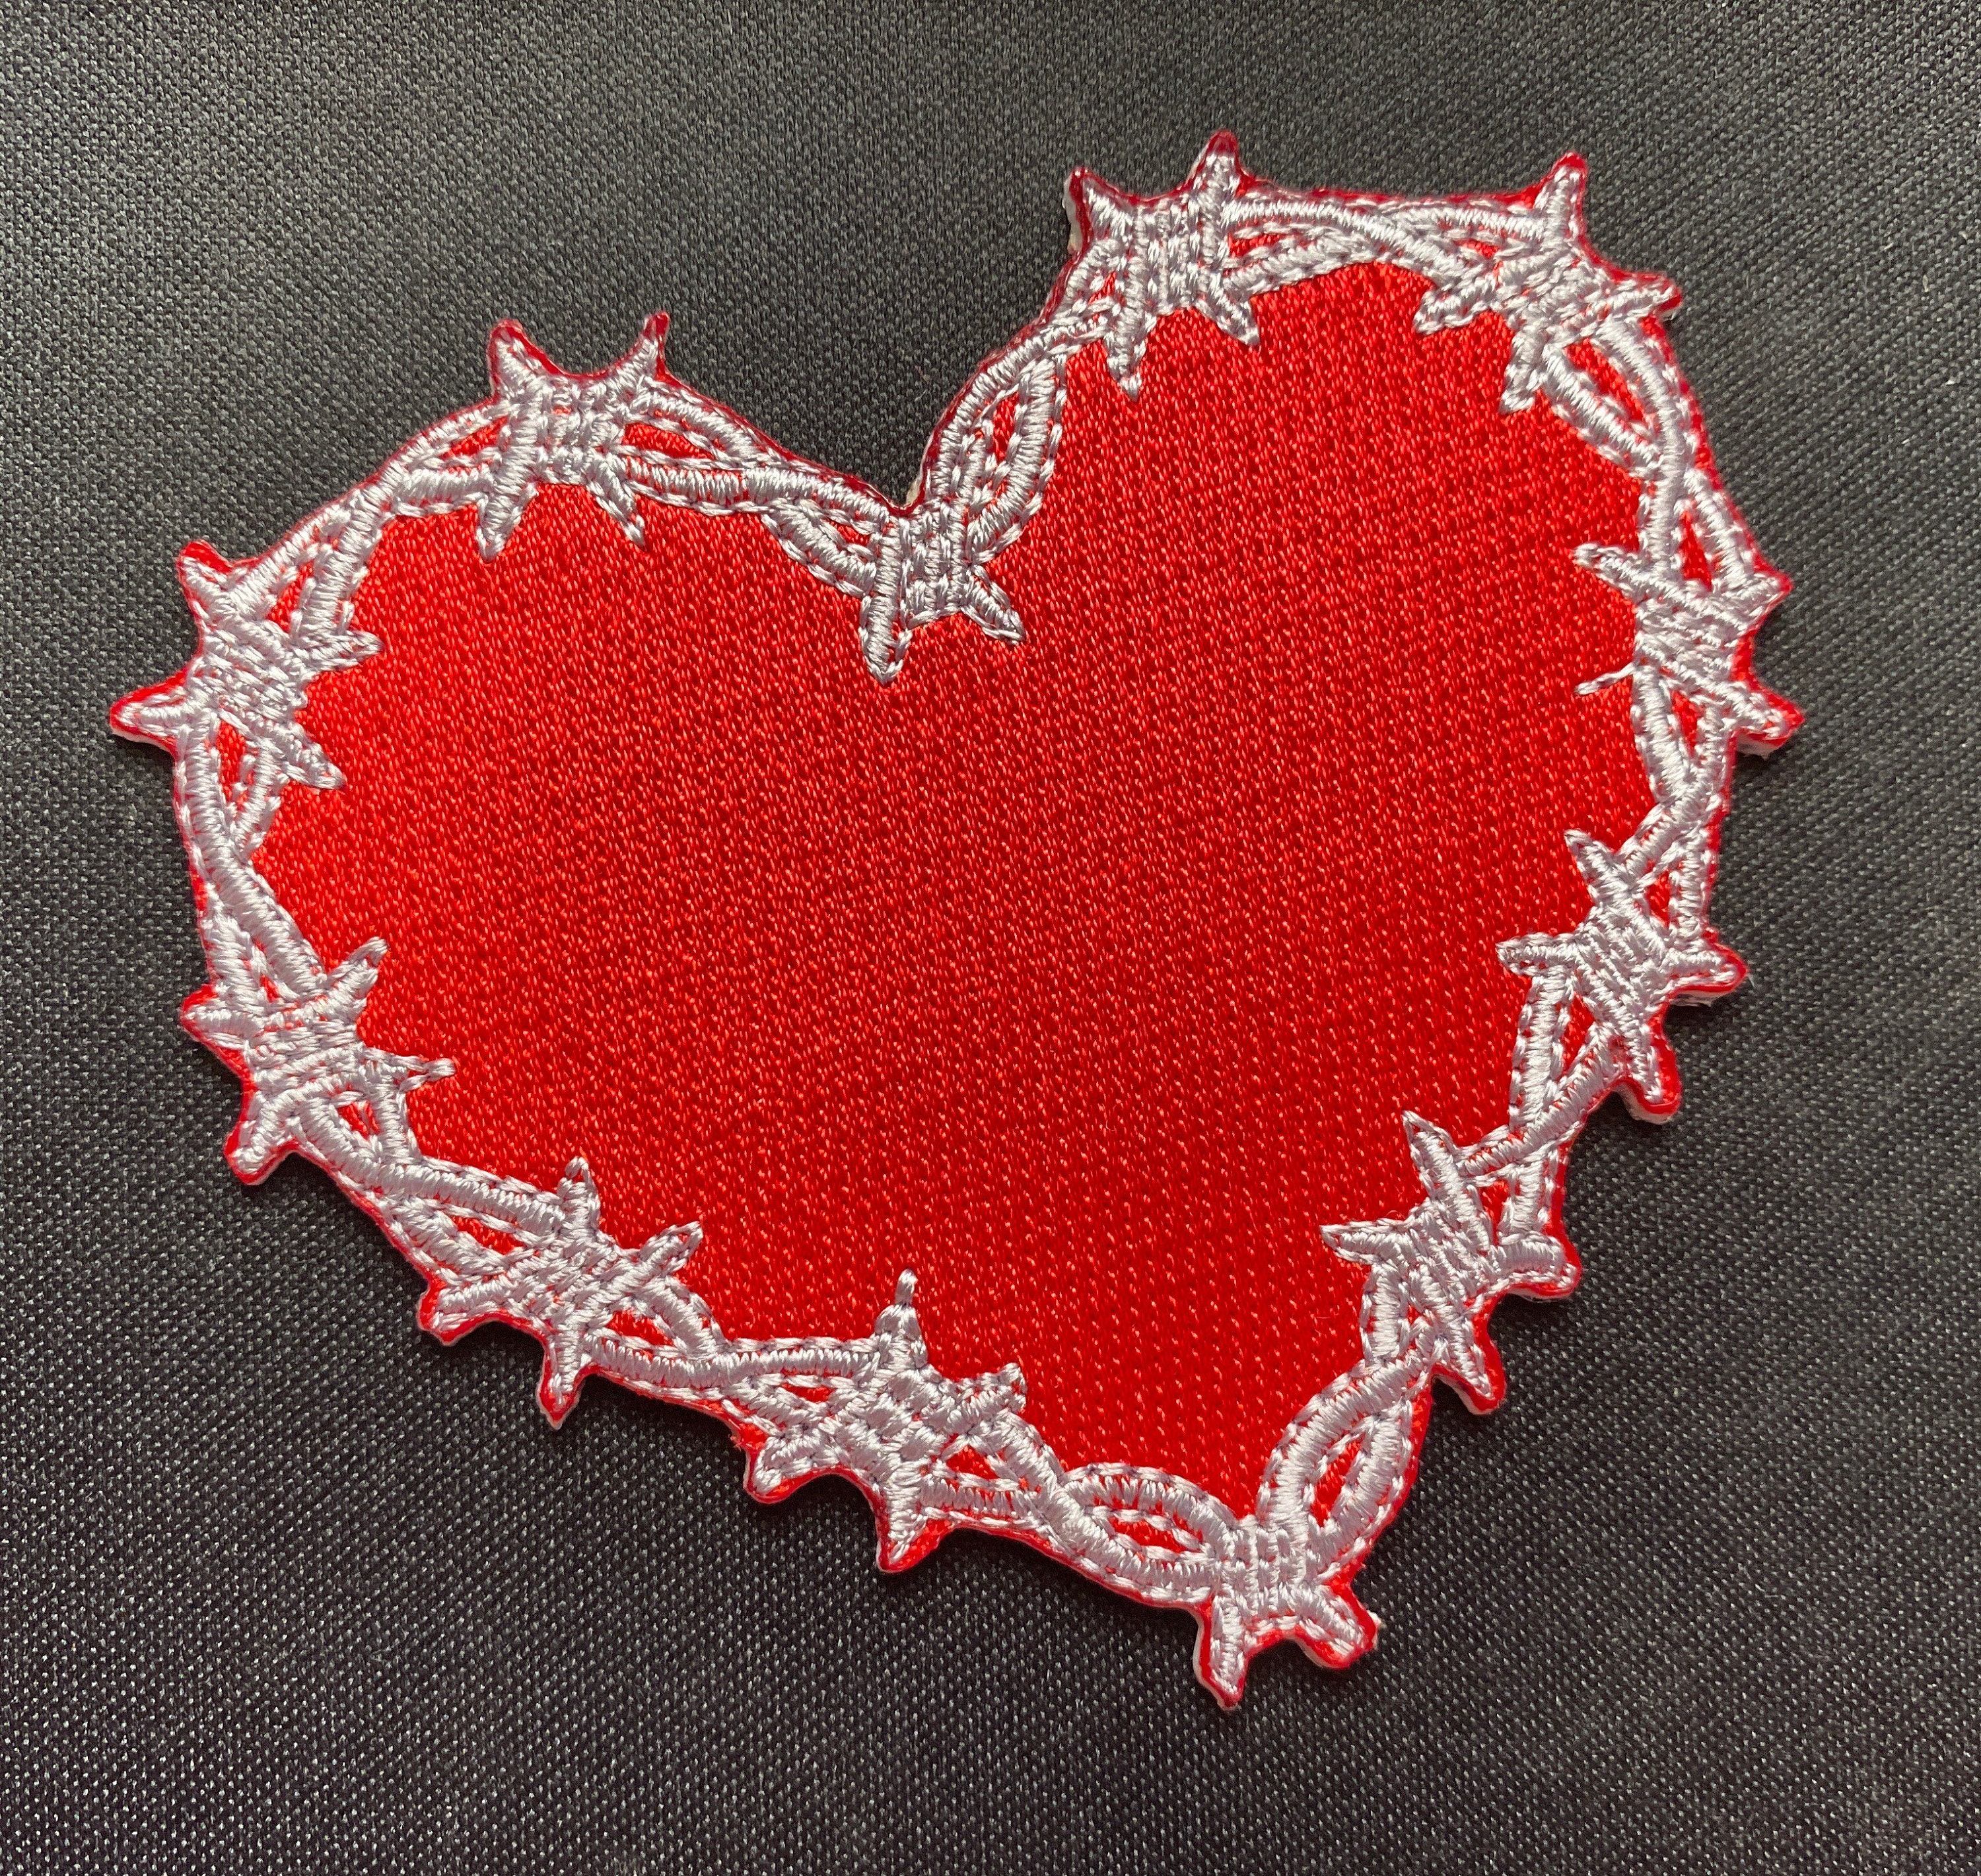 MISDONR 3pcs Red Heart Embroidered Iron on Patches for Clothing Jackets Backpacks 2.7x2.8 inch